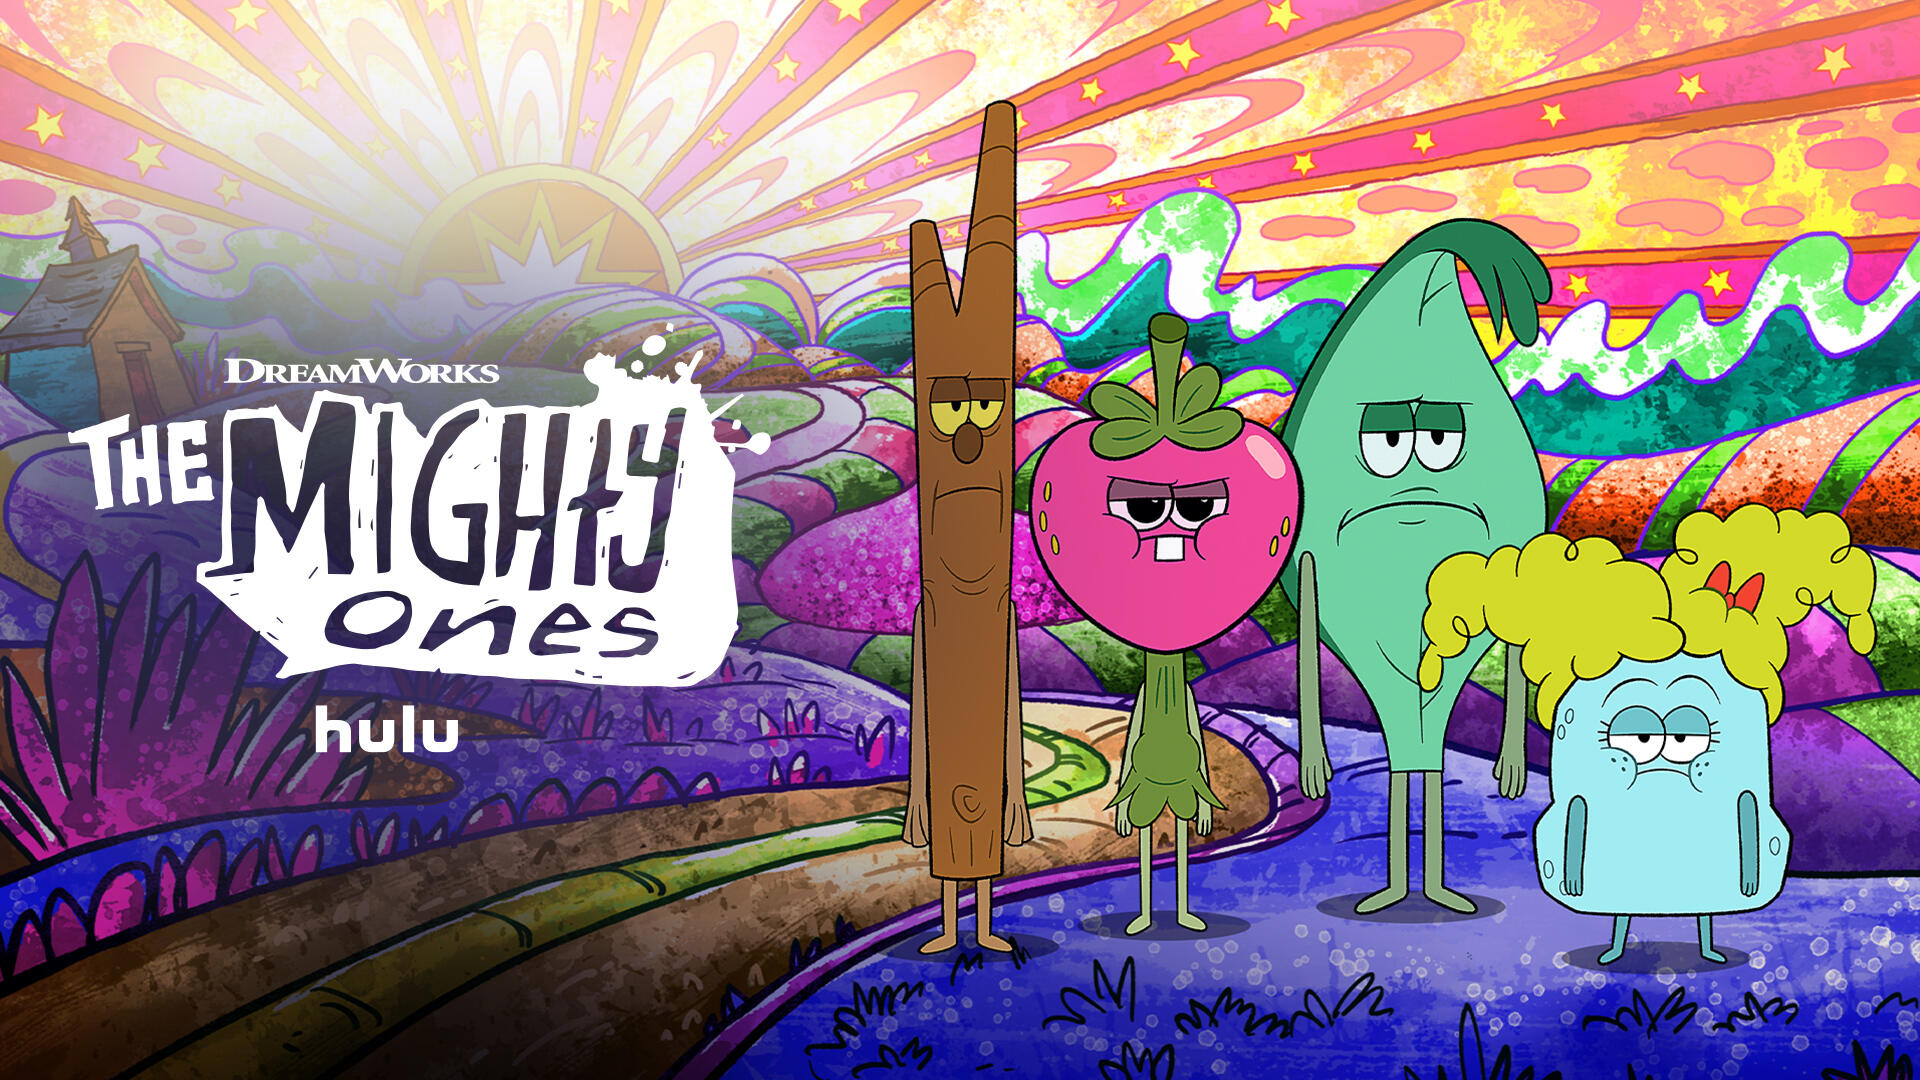 The Mighty Ones -- Season 4 -- The hilarity is cranked up in Season 4 of The Mighty Ones as the gang discovers unexplored areas of the yard. They will do battle in a compost bin that doubles as a gladiator arena, become unwitting hosts of a party for a swarm of unruly cicadas, embark on a dangerous quest to get Leaf his first pair of pants, and even blast off into space — or what they think is space. Along the way, we’ll meet the long-lost fifth Mighty One, Gherkin, and Leaf and Twig’s estranged brother. The Mighty Ones’ imaginations run wild in these uproarious misadventures that are more than just another day in the yard. (Courtesy of DreamWorks)